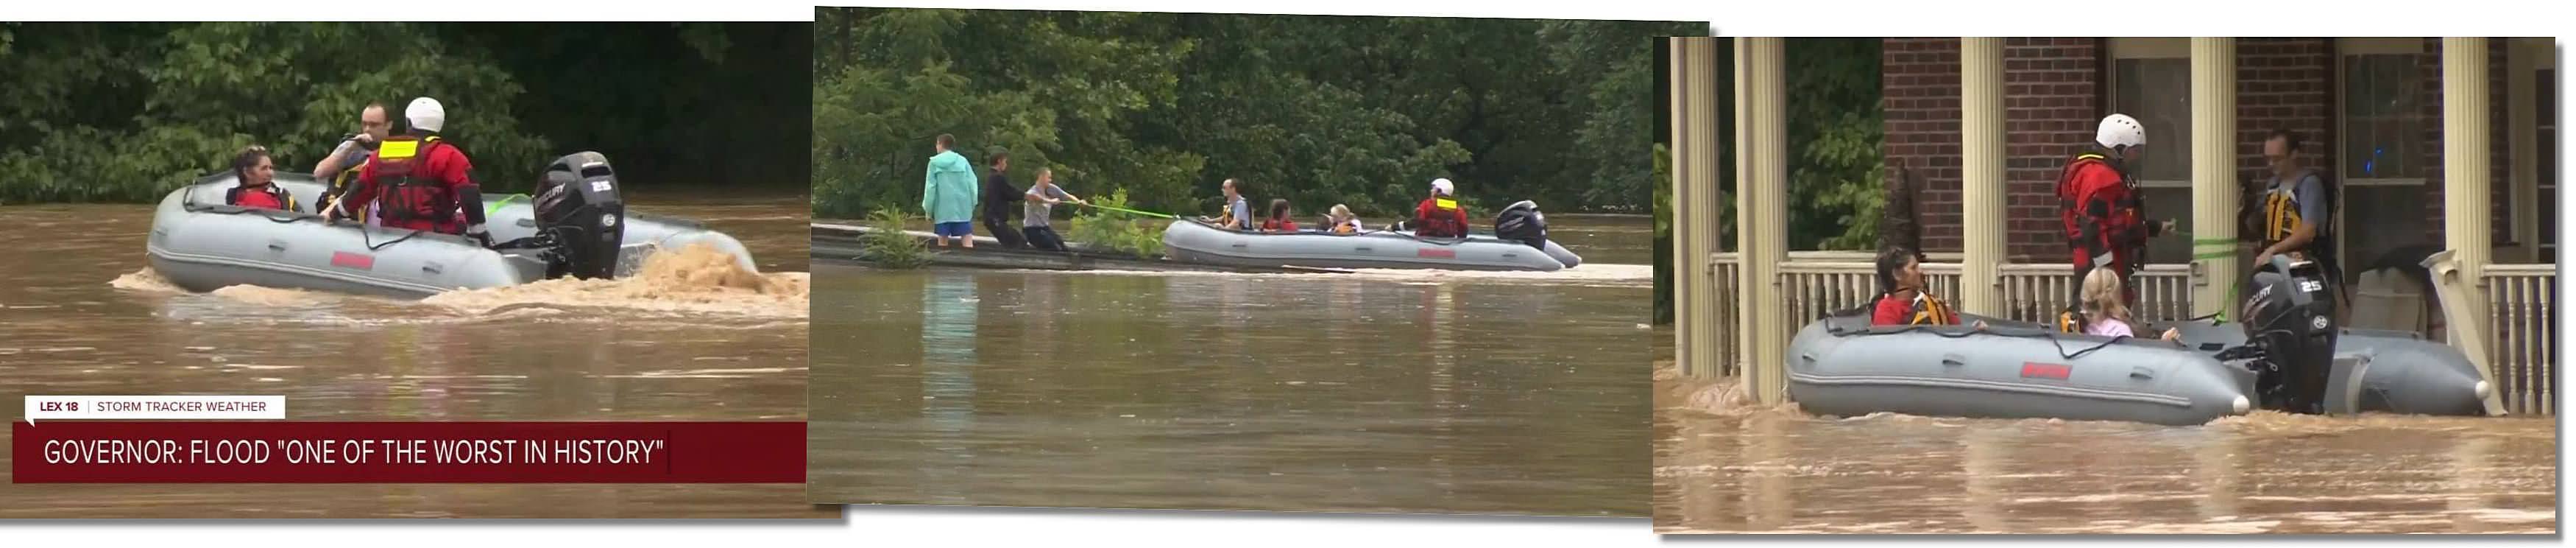 Saturn boat used during flood rescue